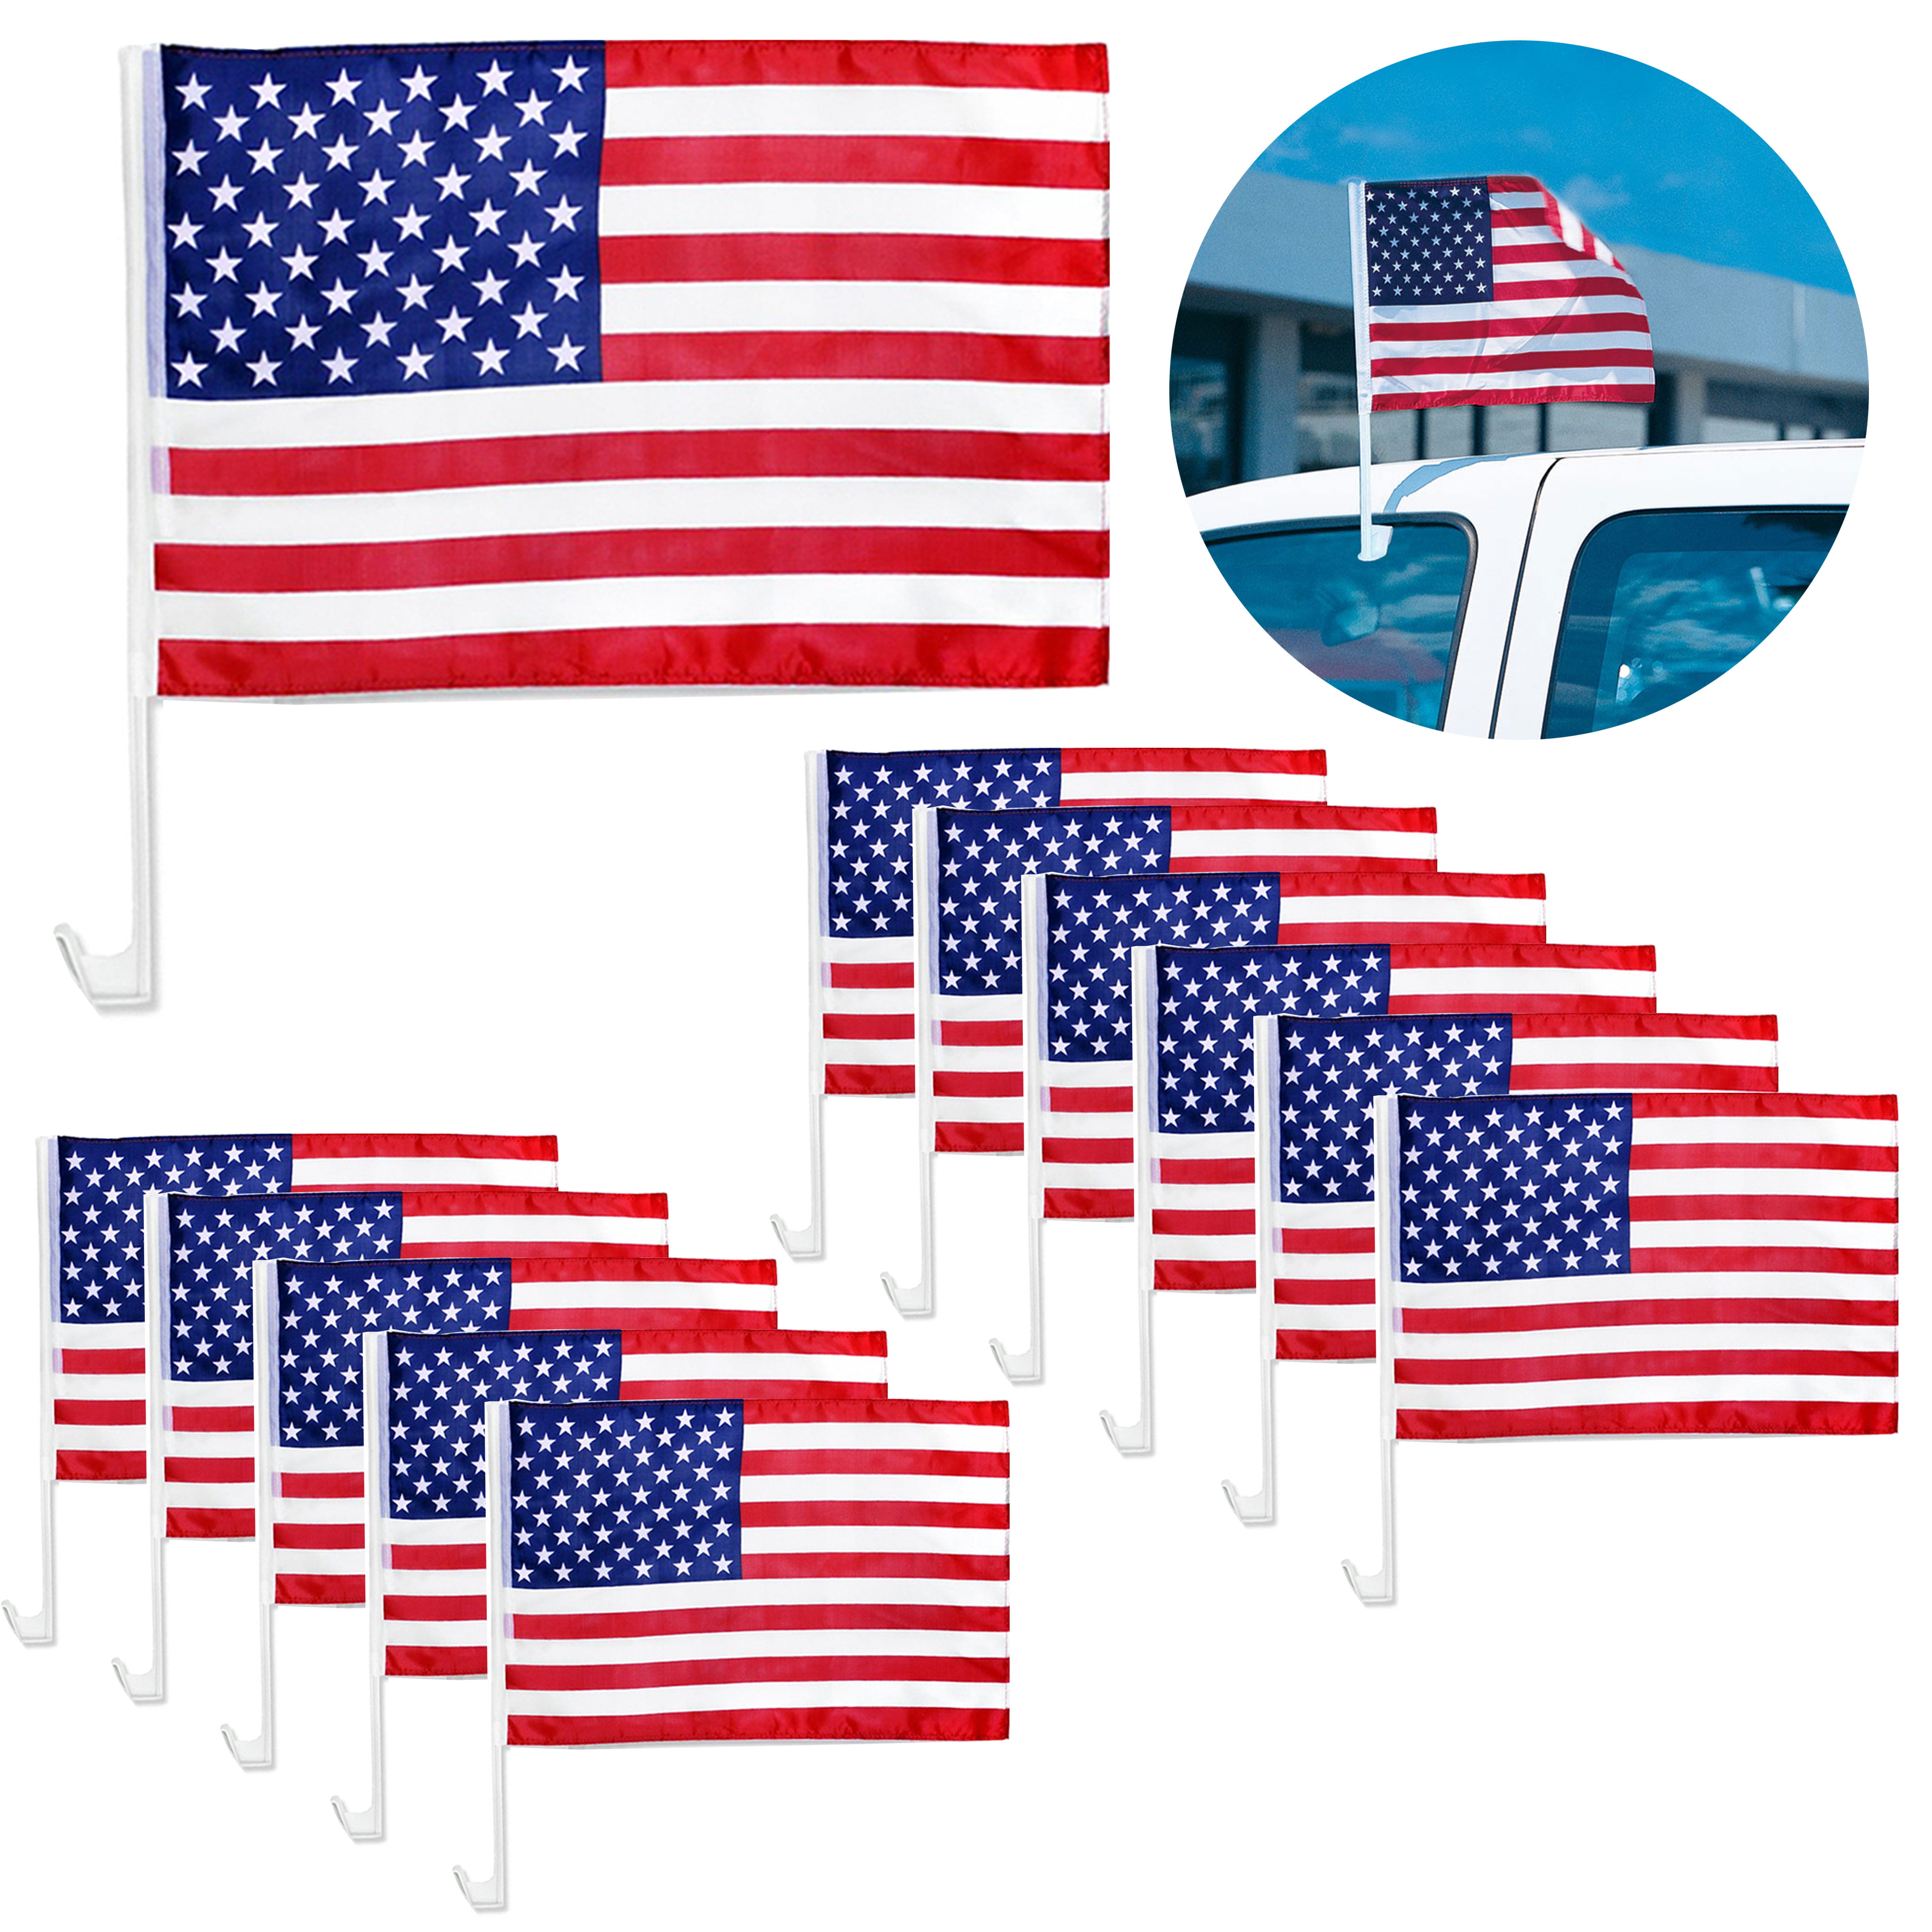 18" X 12" Patriotic Country Window Clip On Vehicle Flag United State Car Flag